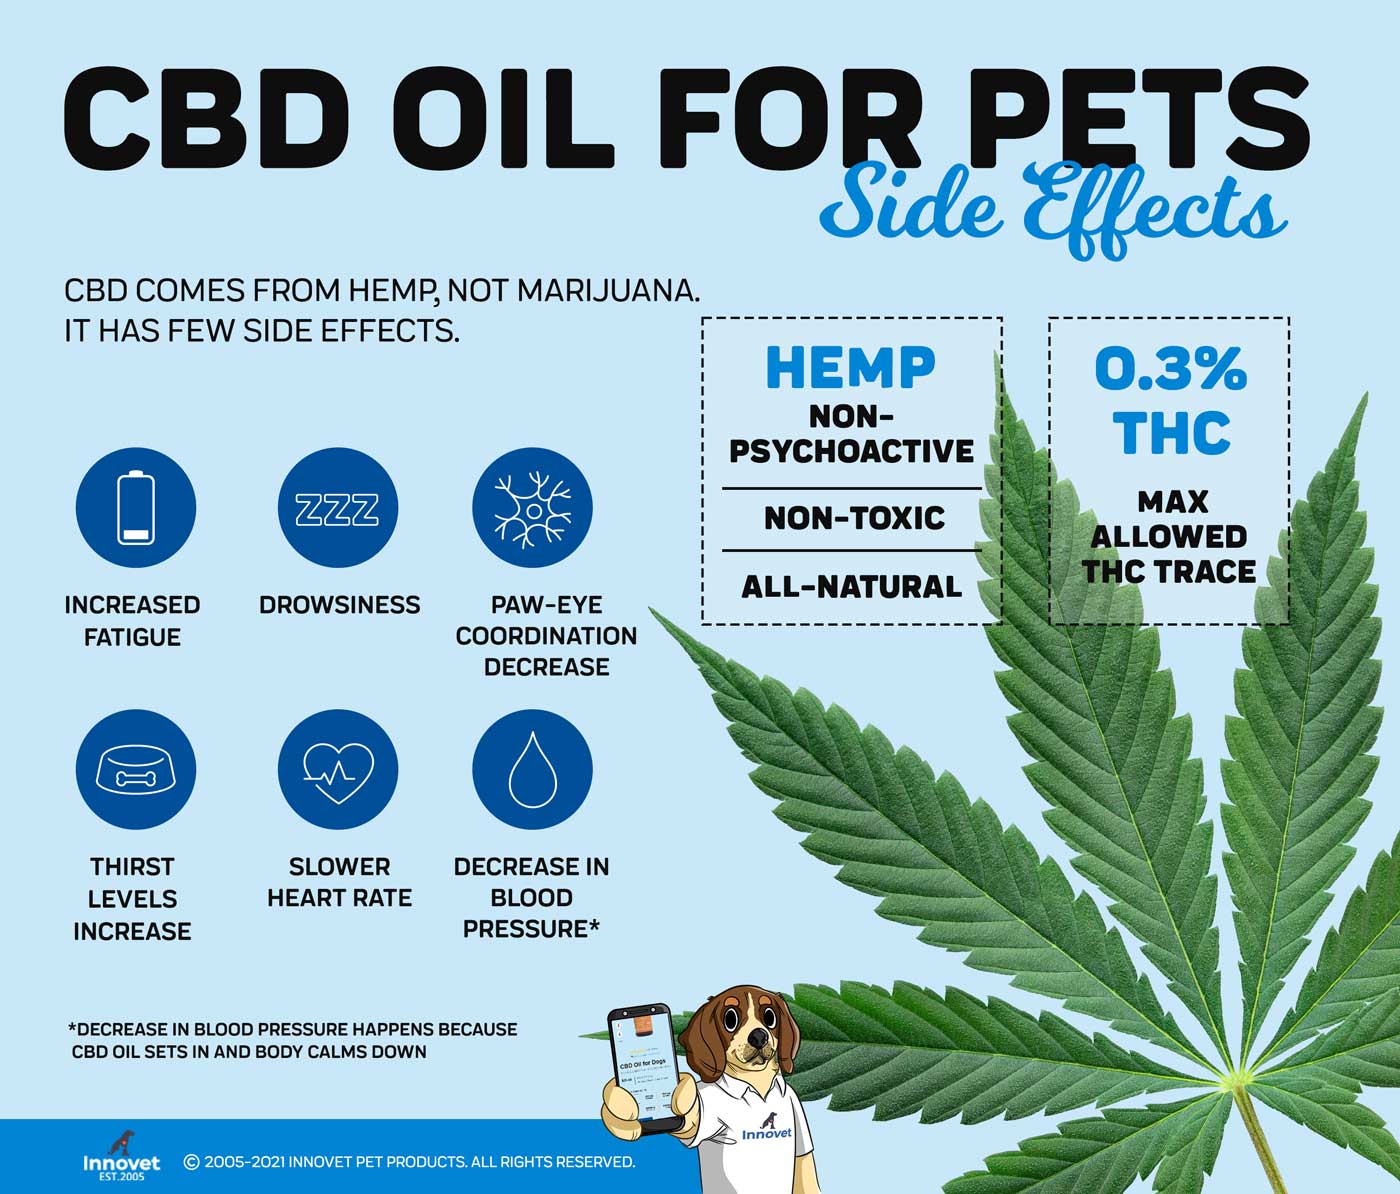 CBD Oil is safe and has no lethal side effects